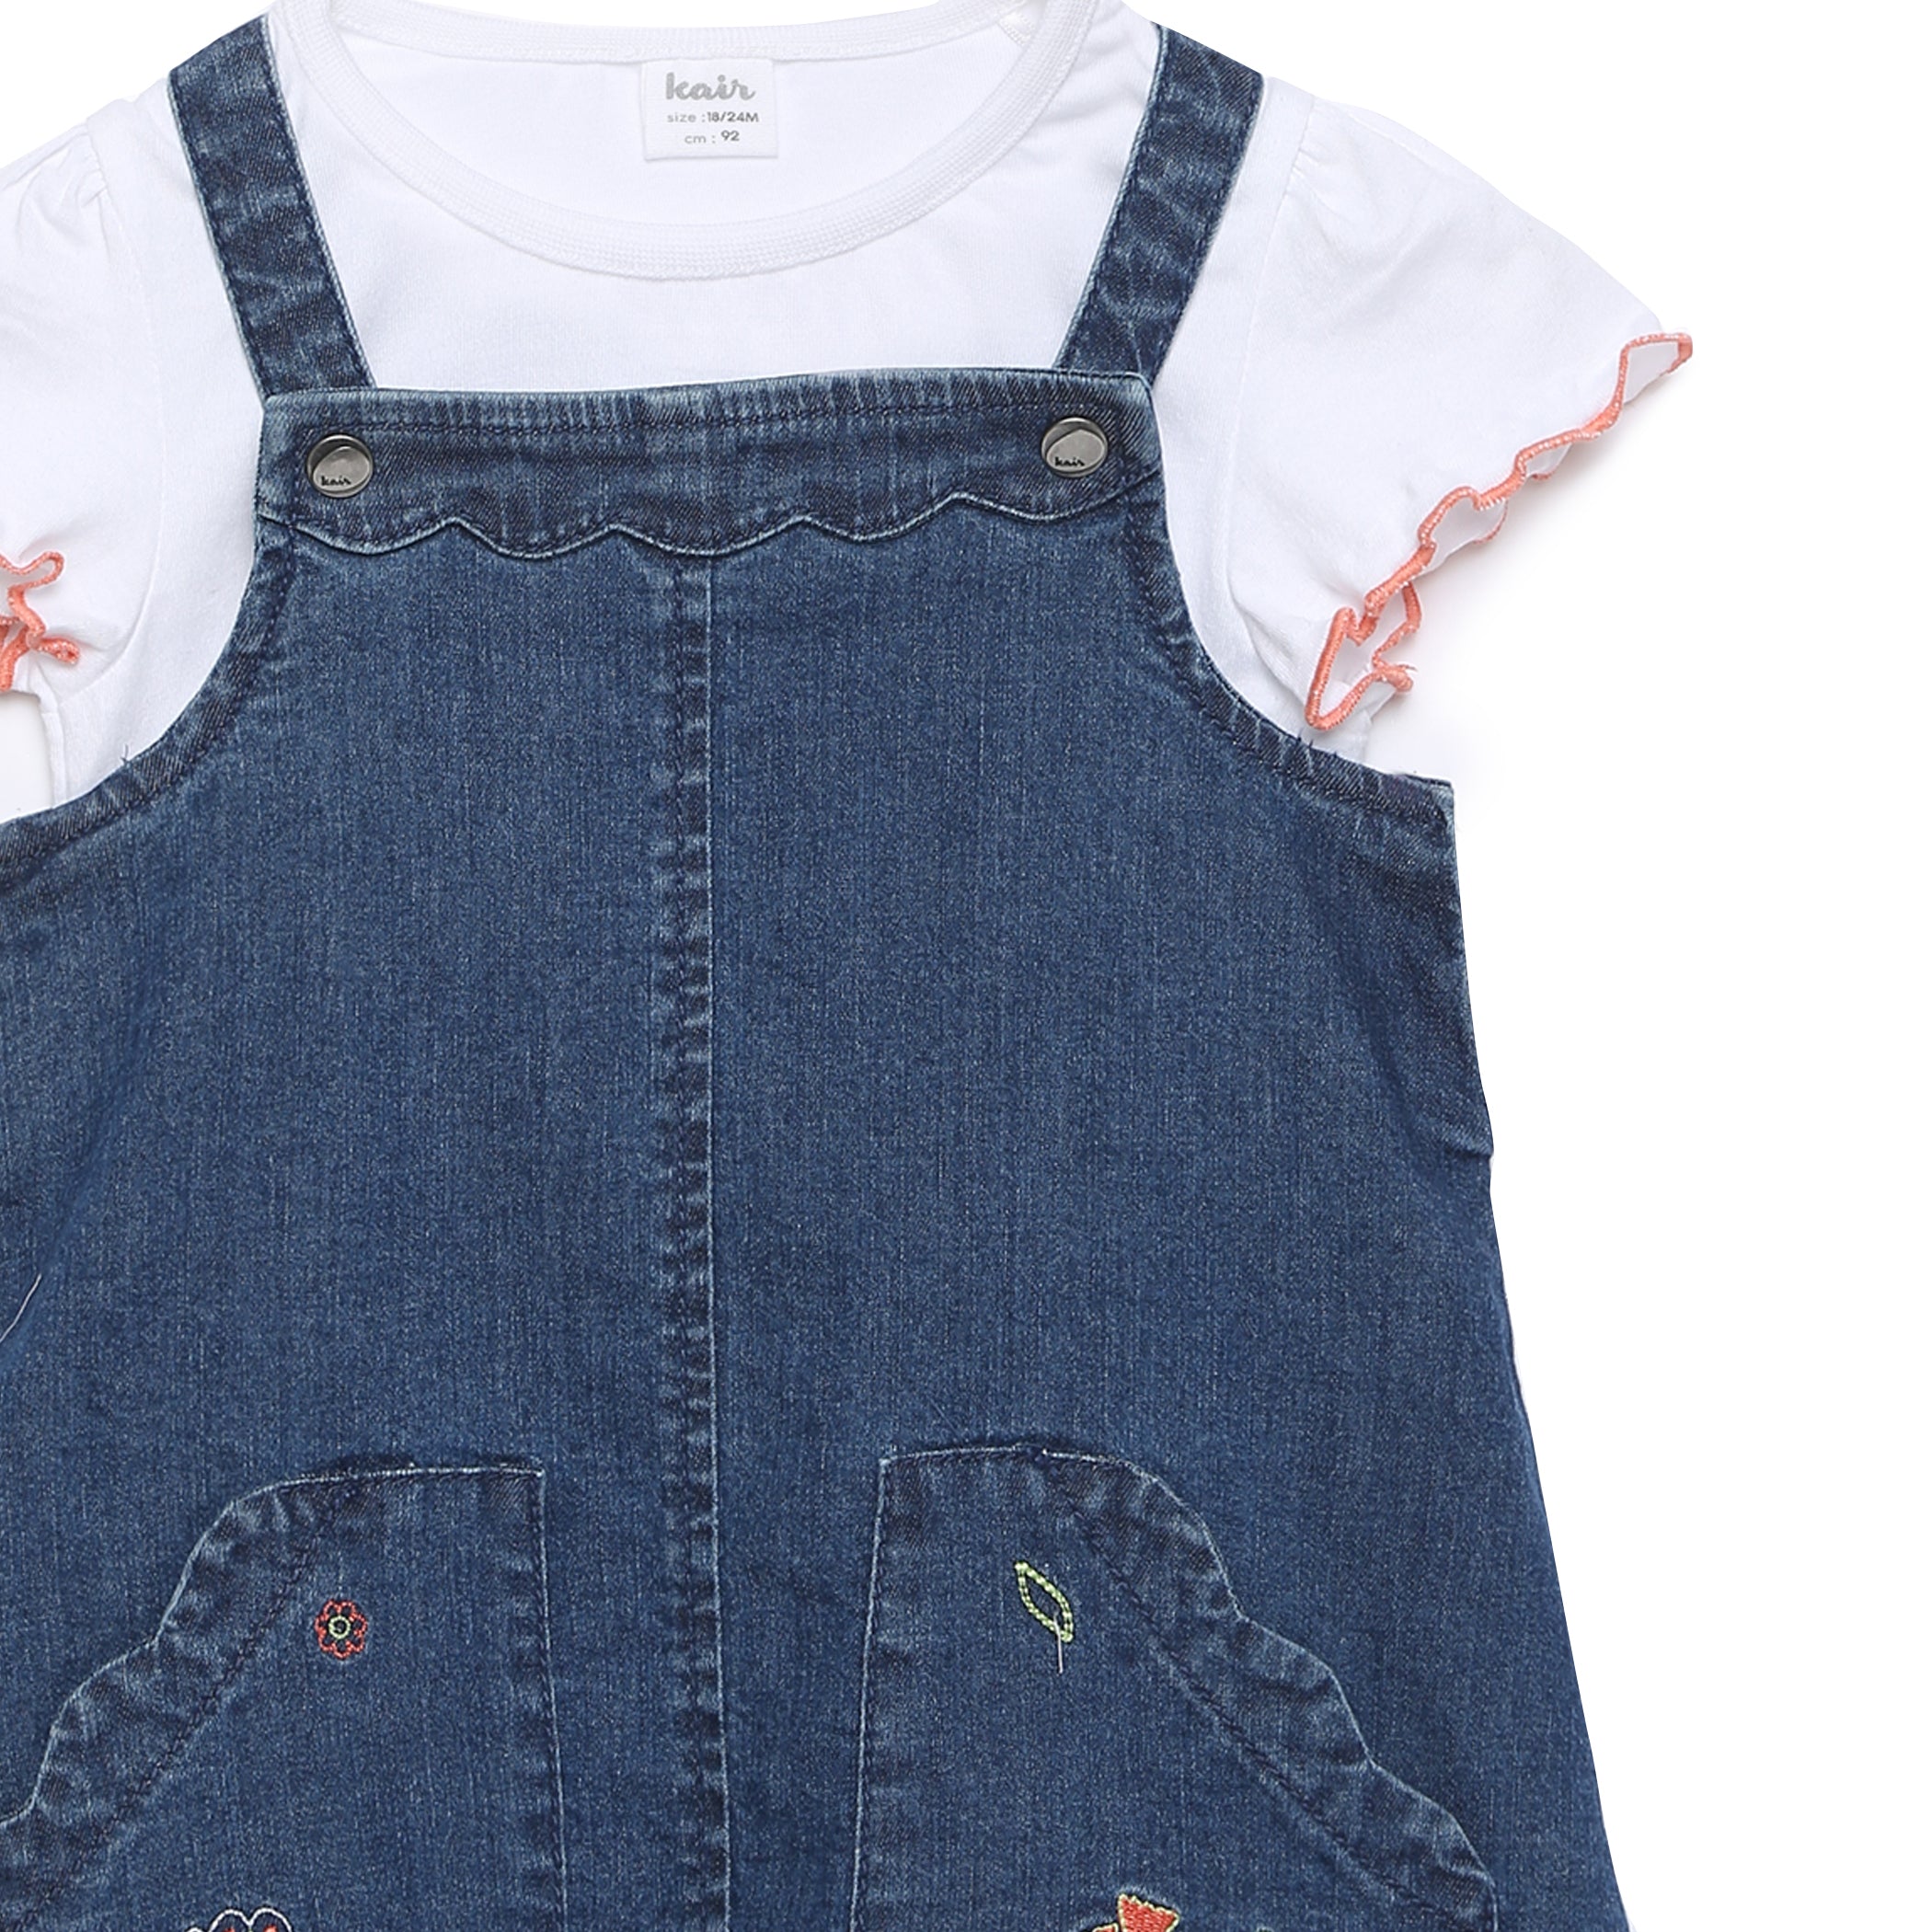 Buy Pink Color Full Sets Casual Wear Corduroy Printed Dungaree Dress and  T-Shirt Set Clothing for Girl Jollee